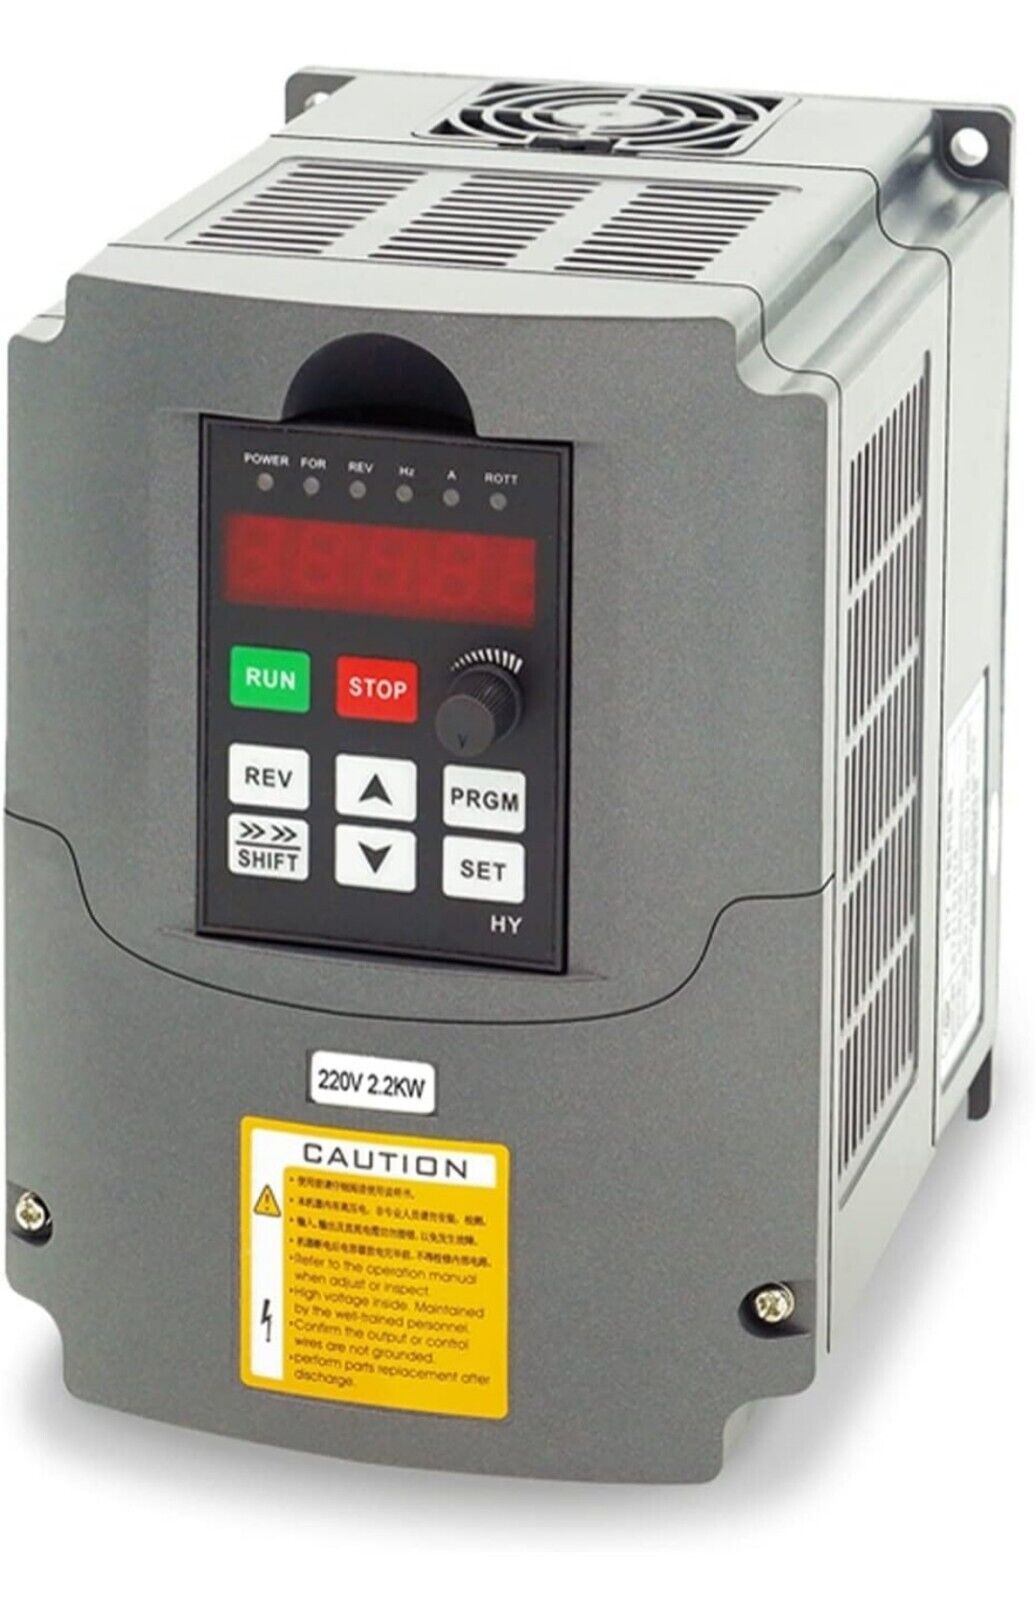 New Huanyang 2.2 KW 220 V 3 HP Variable Frequency Drive - HY02D223B With Manual